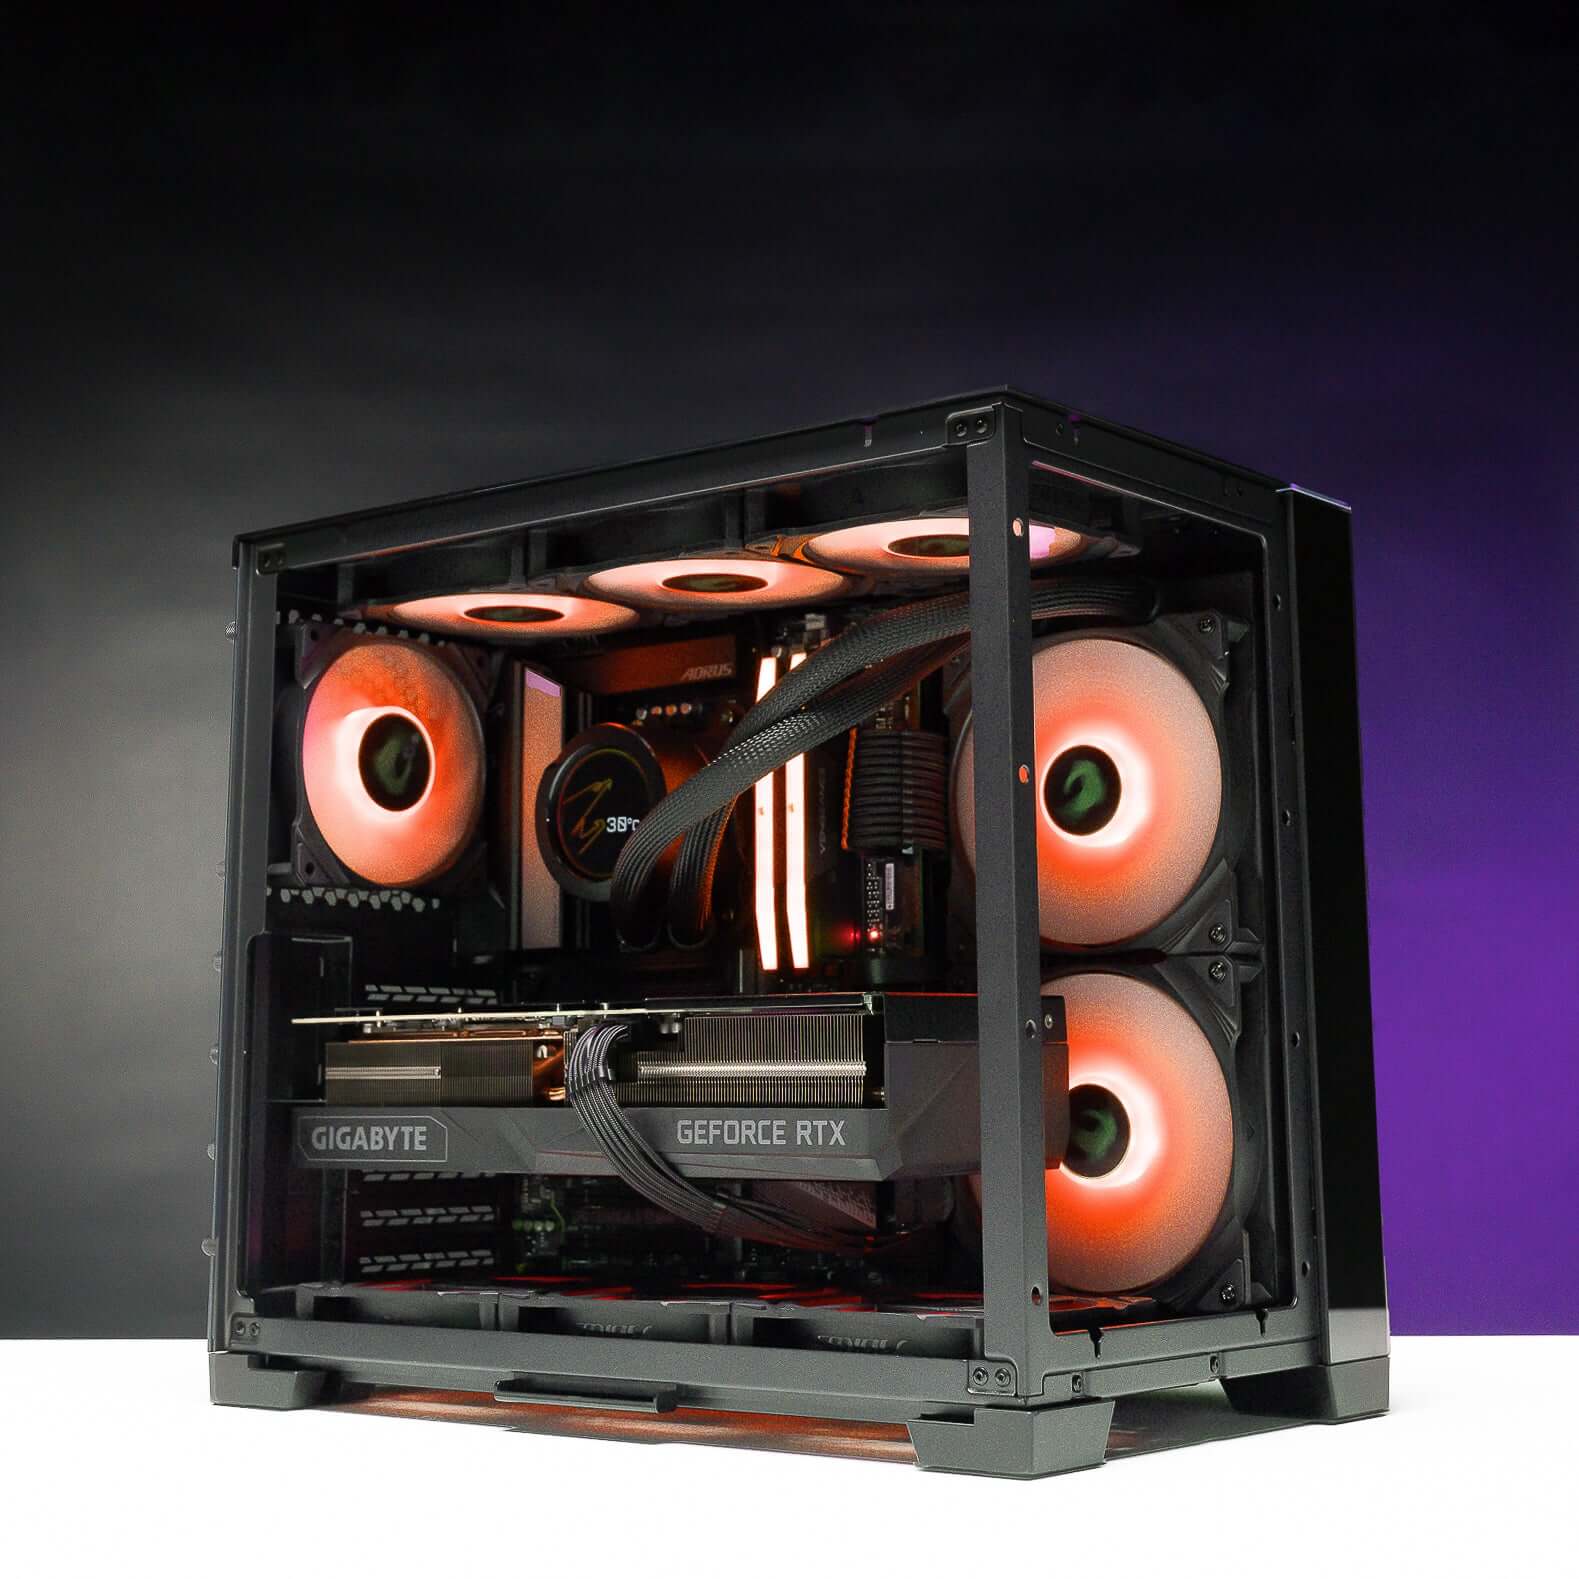 Collection of Exodia gaming PCs offering top-tier performance and cutting-edge features